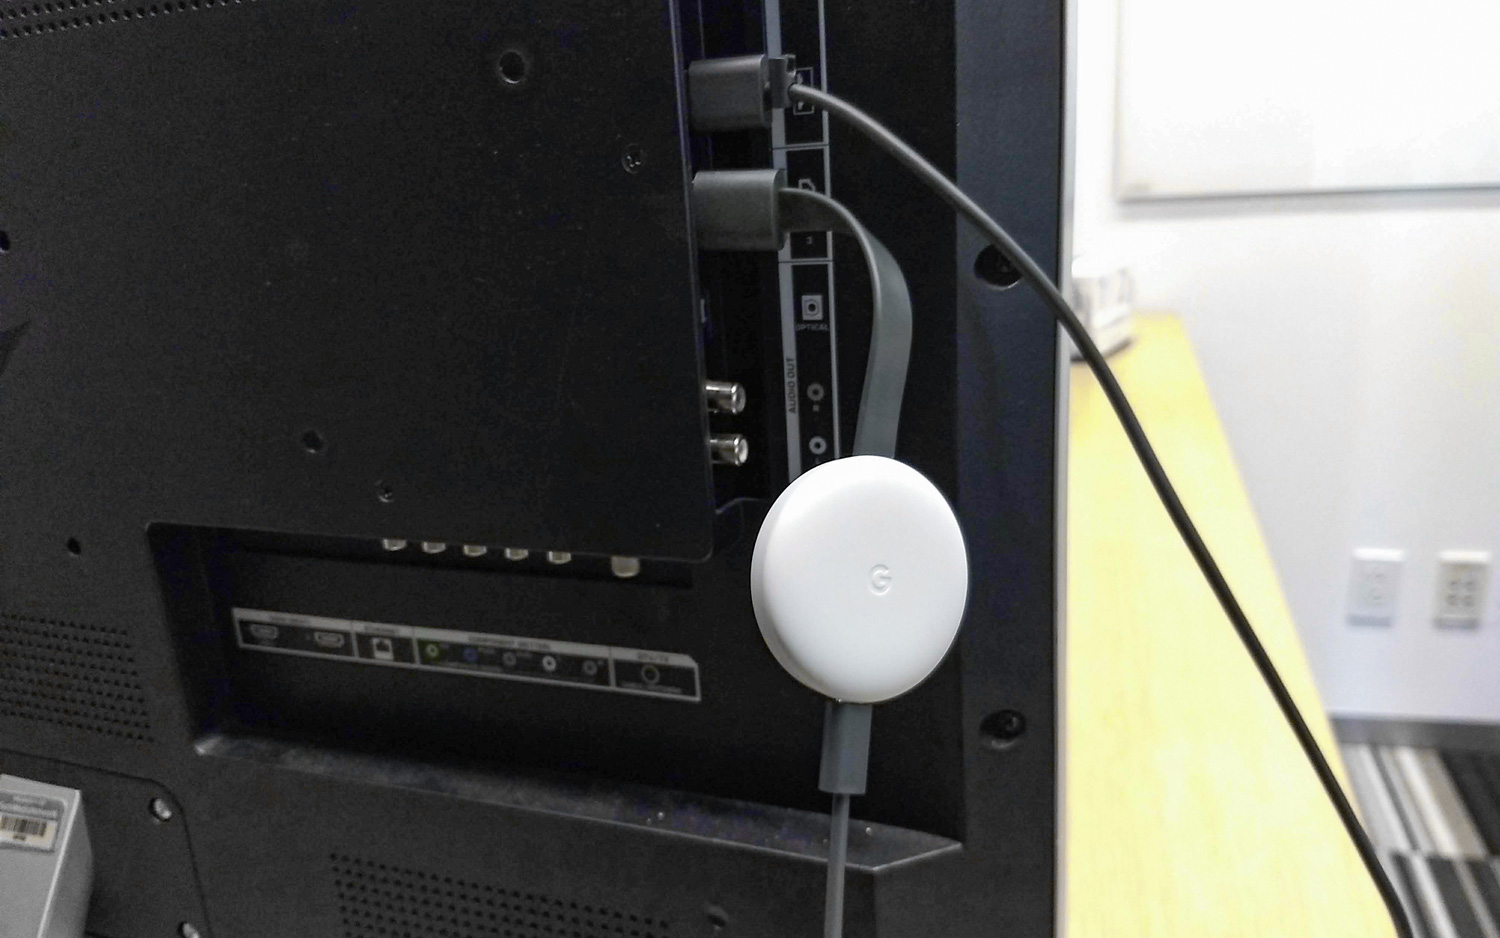 Google Chromecast just sits behind the screen